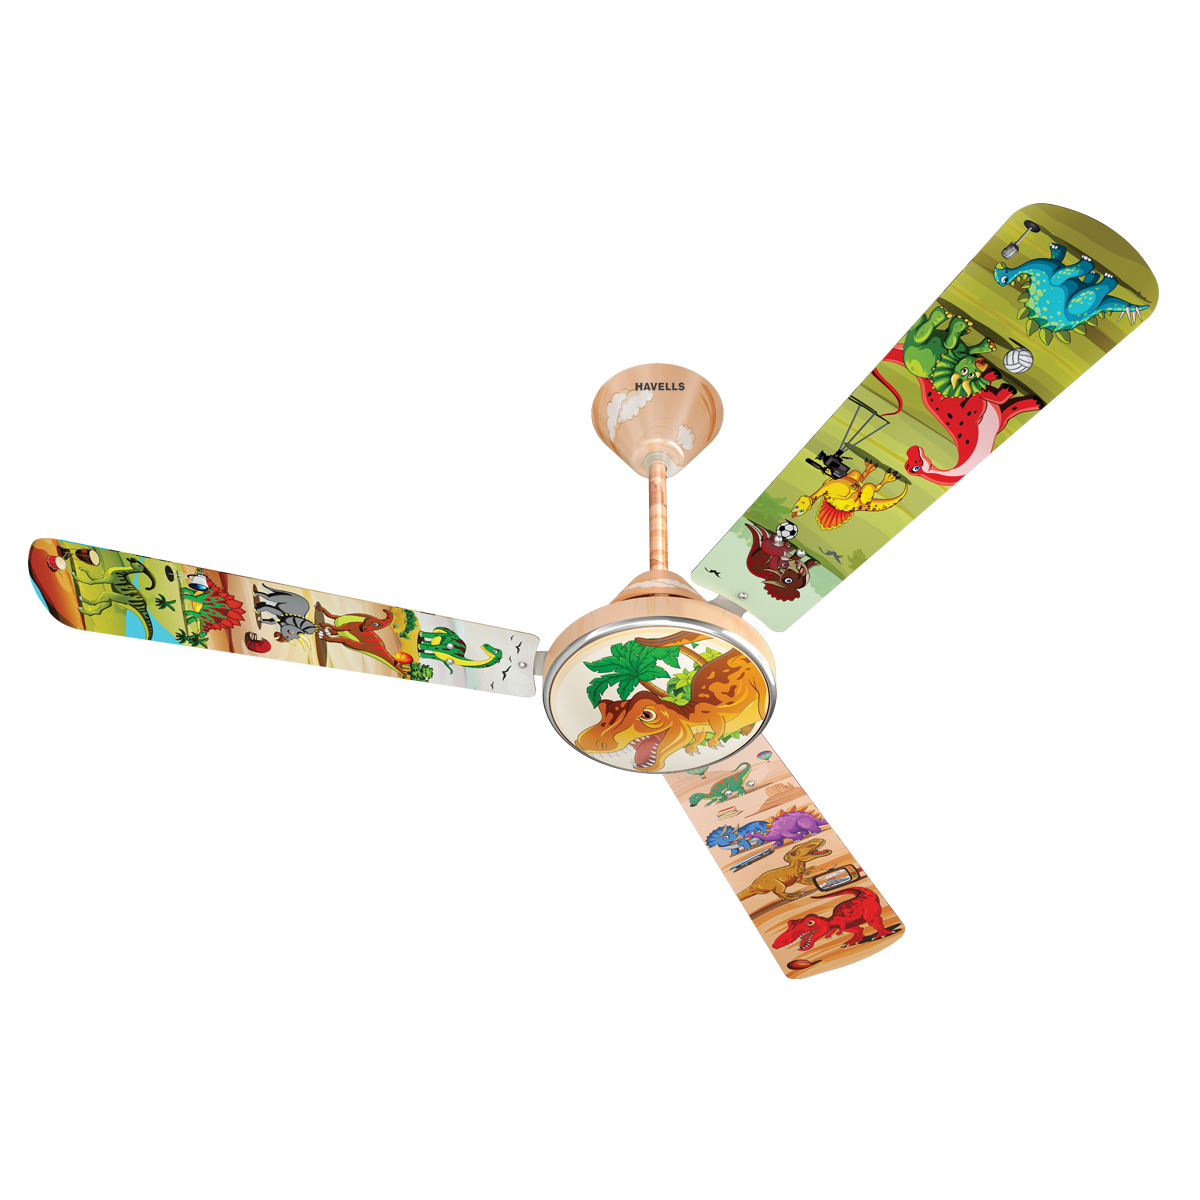 Havells Saurous World 120cm Sweep 3 Blade Ceiling Fan (Double Ball Bearing, FHCWLSTYEL48, Multicolor)_1